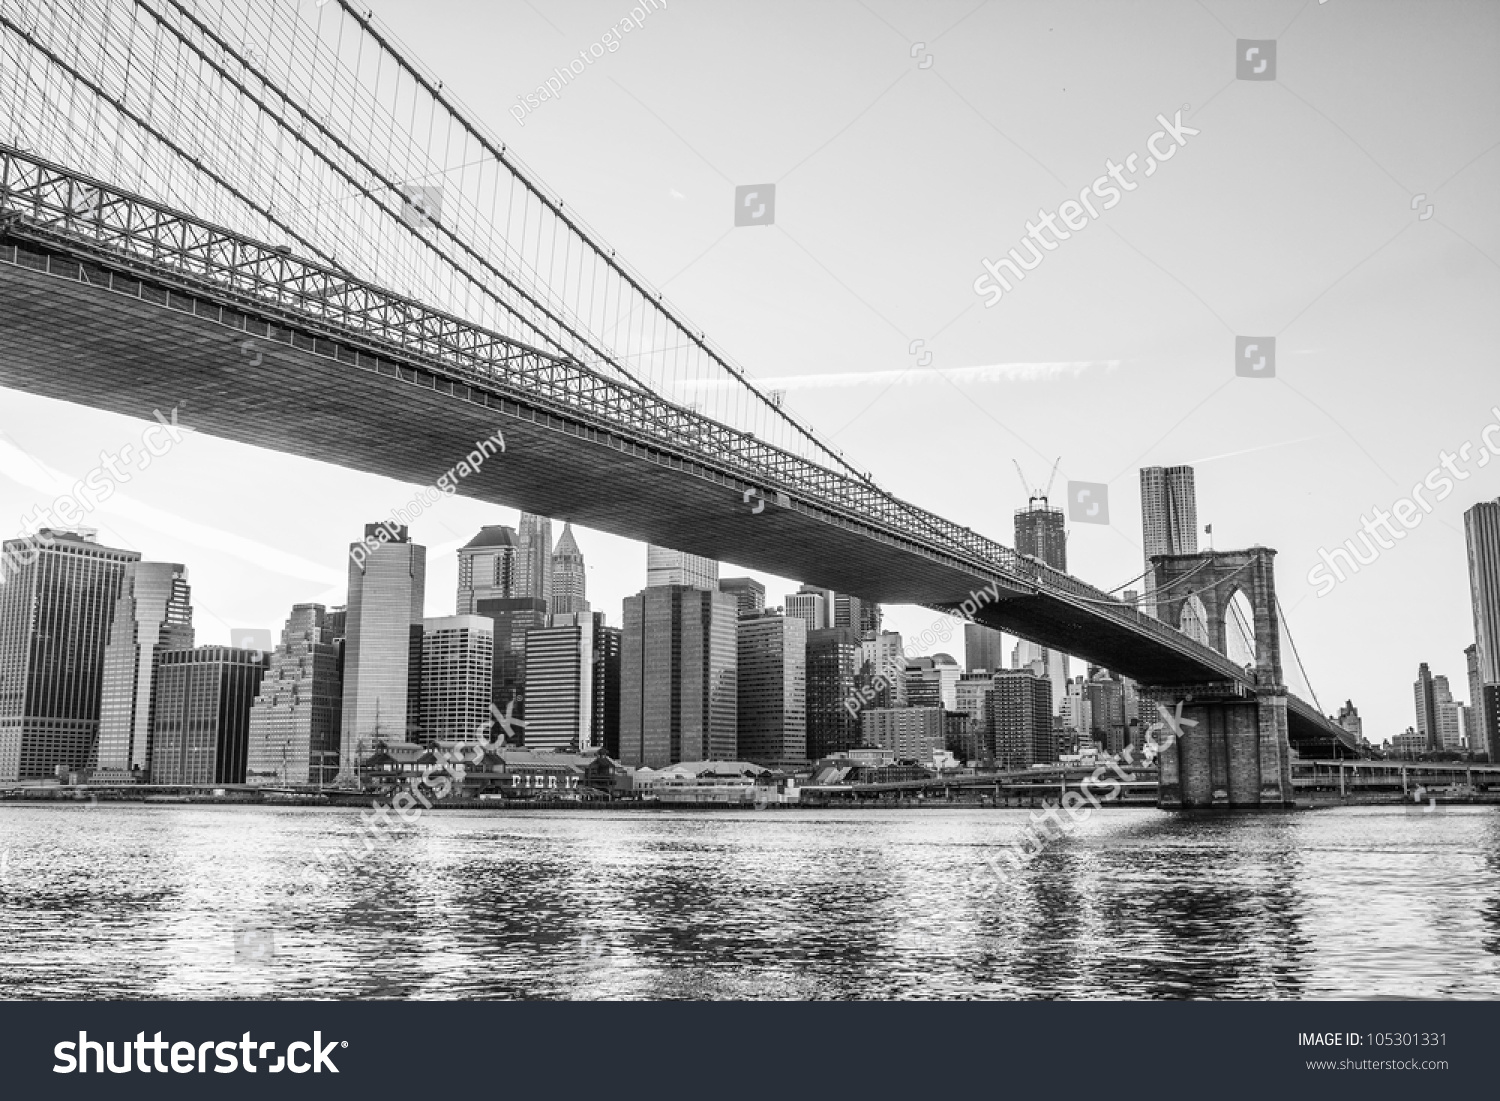 Architectural Detail of Brooklyn Bridge in New York City, U.S.A. #105301331